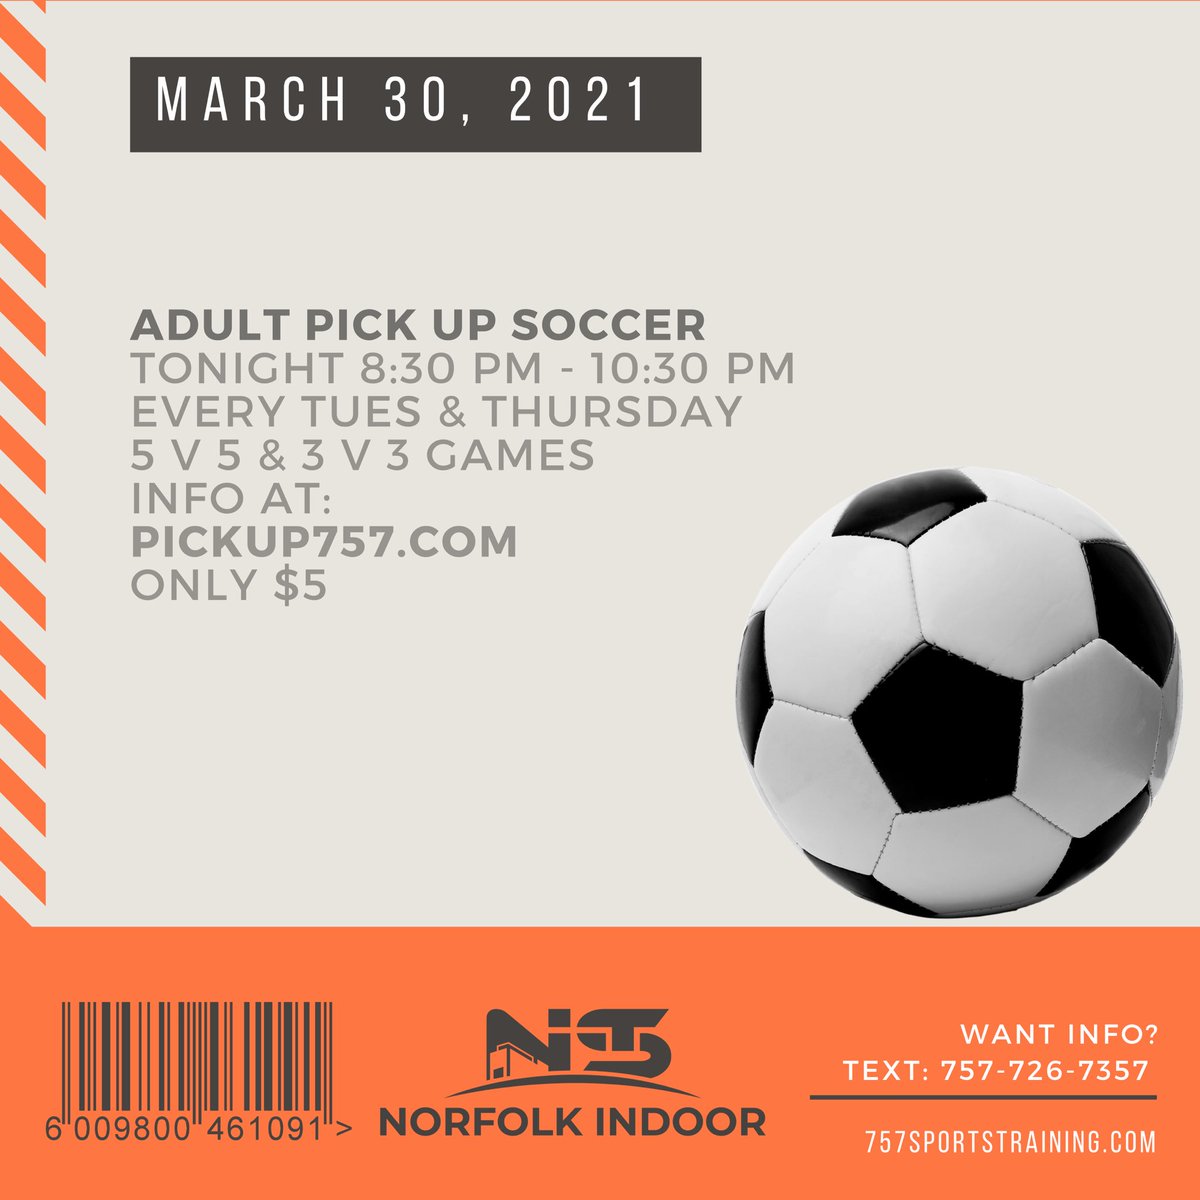 March 30 Schedule at NIST Adult Pick Up Soccer 8:30pm Pickup757.com ⚽️ ➡️ Check out our 7 week ‘pre-summer’ program by GAME Academy that starts April 11 ✅